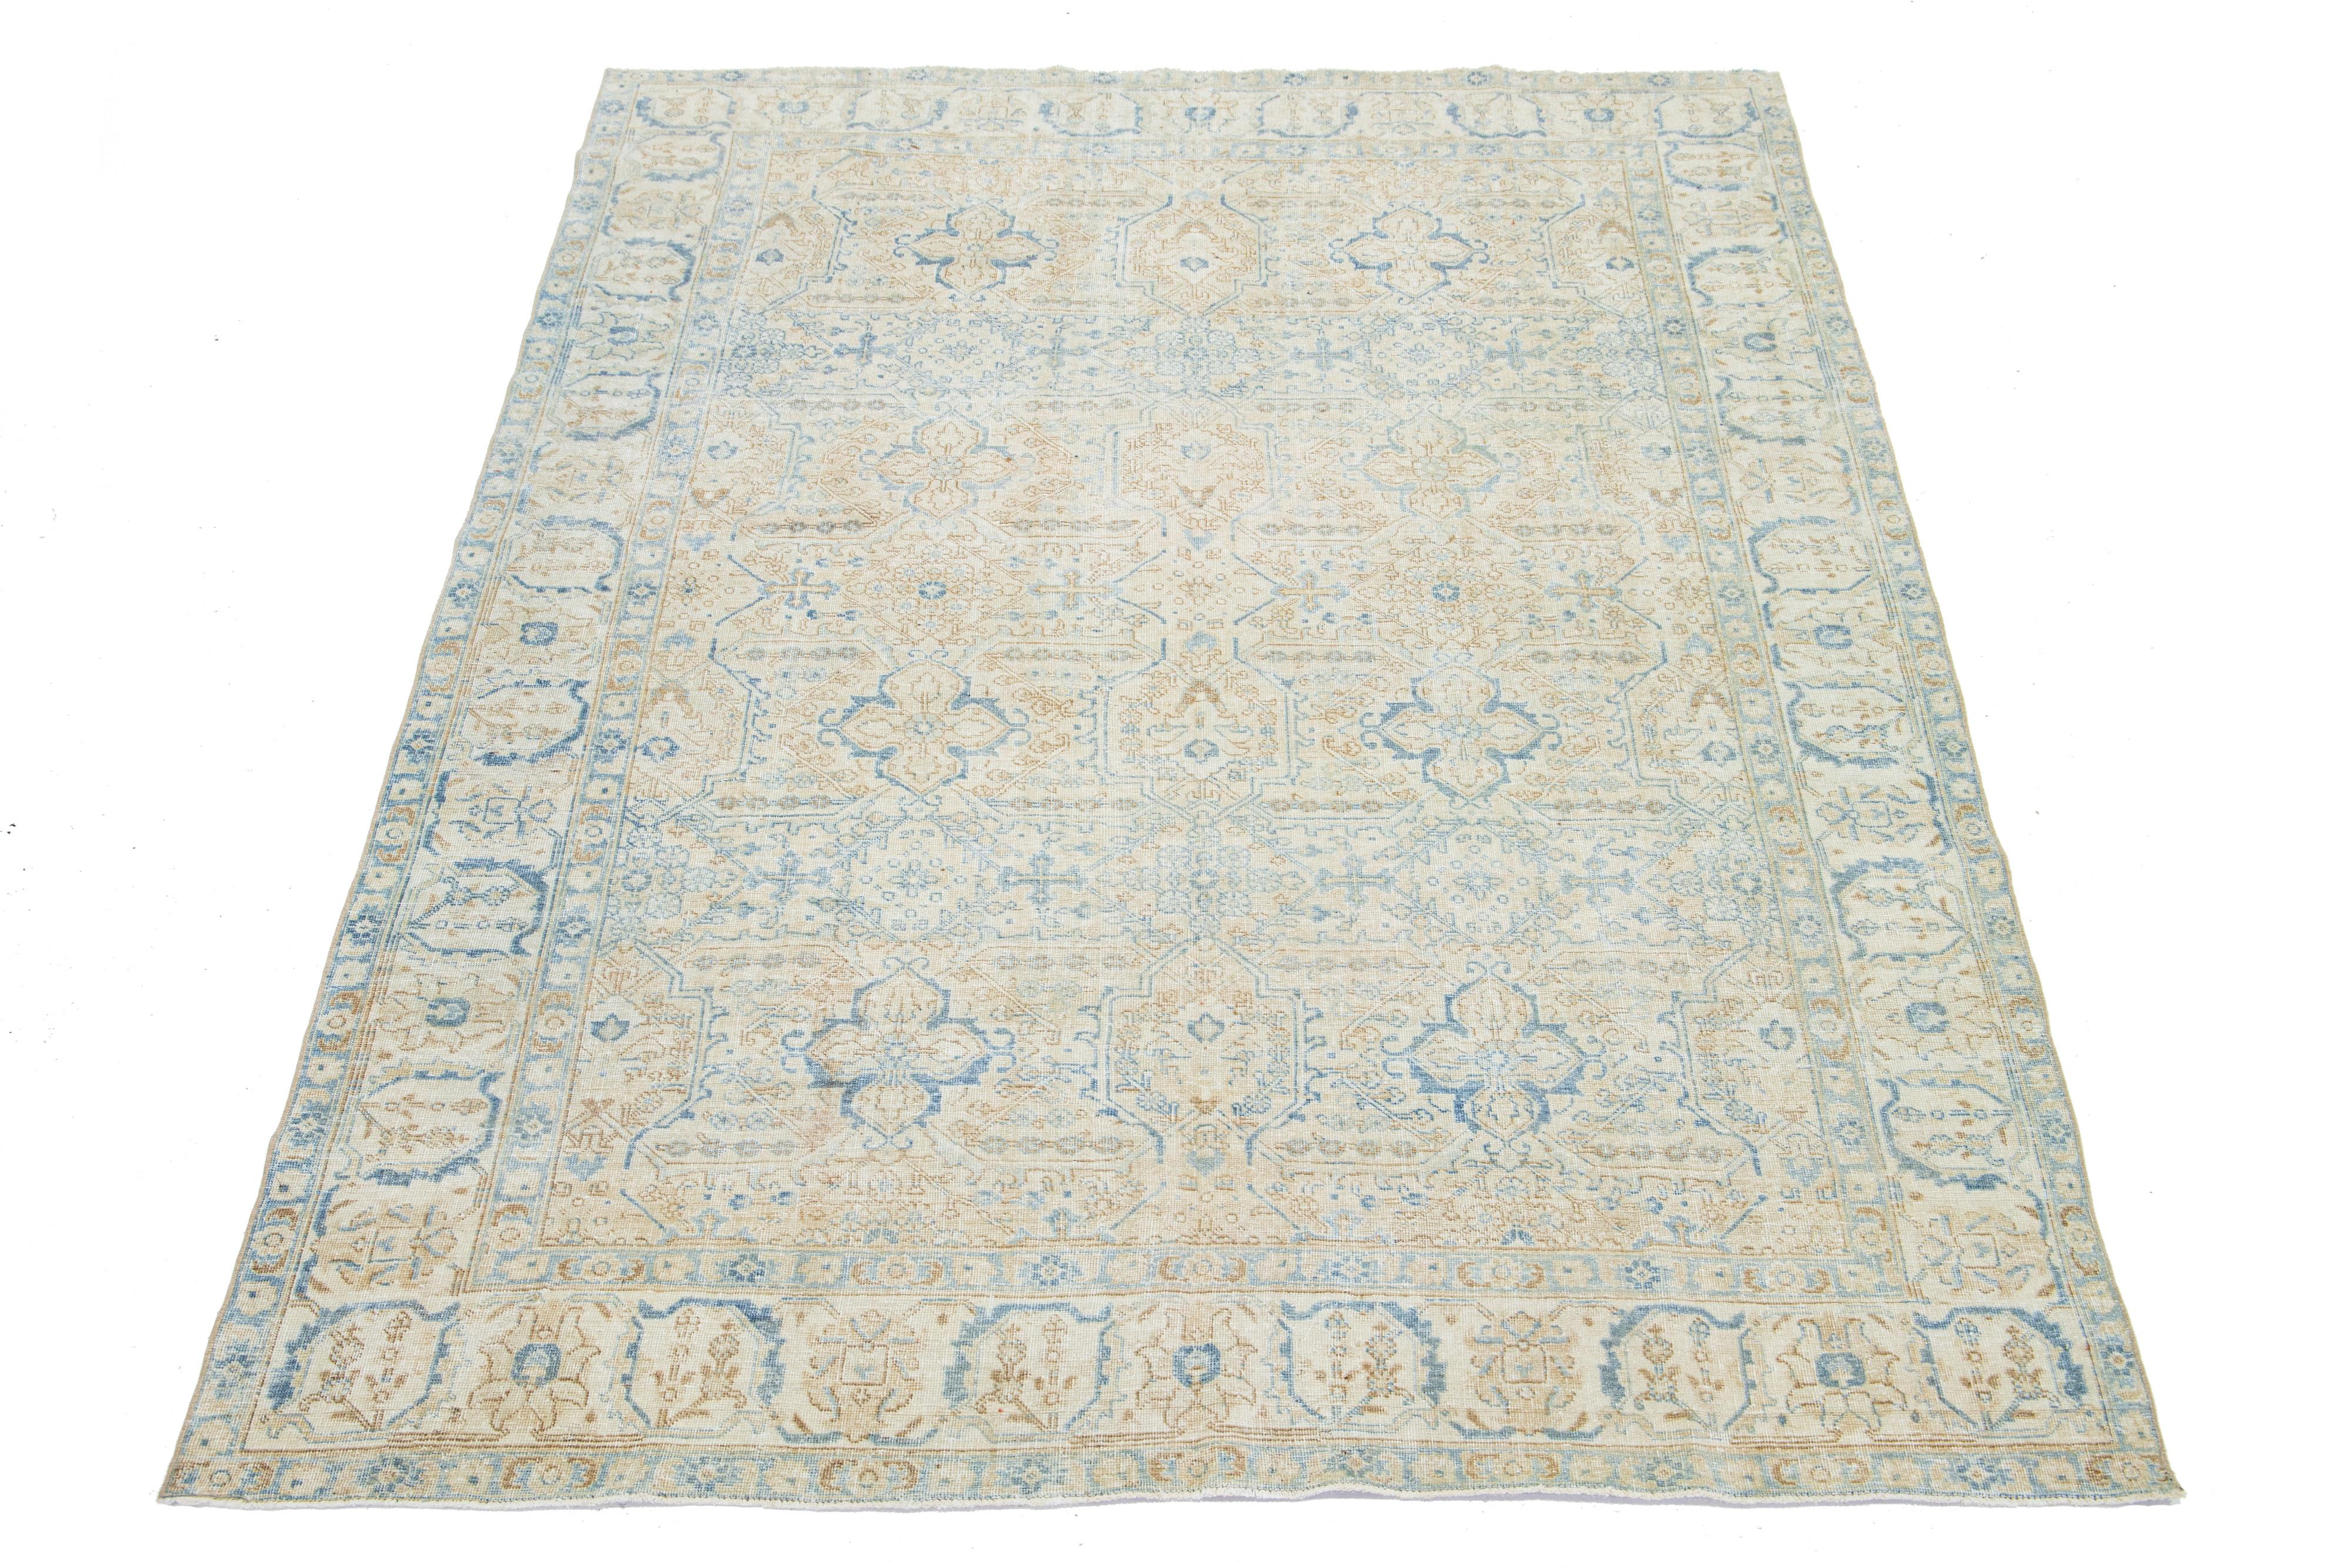 This antique Persian Heriz rug is crafted with hand-knotted wool. The beige-colored field features a captivating allover pattern embellished with shades of blue and brown.

This rug measures 6'6